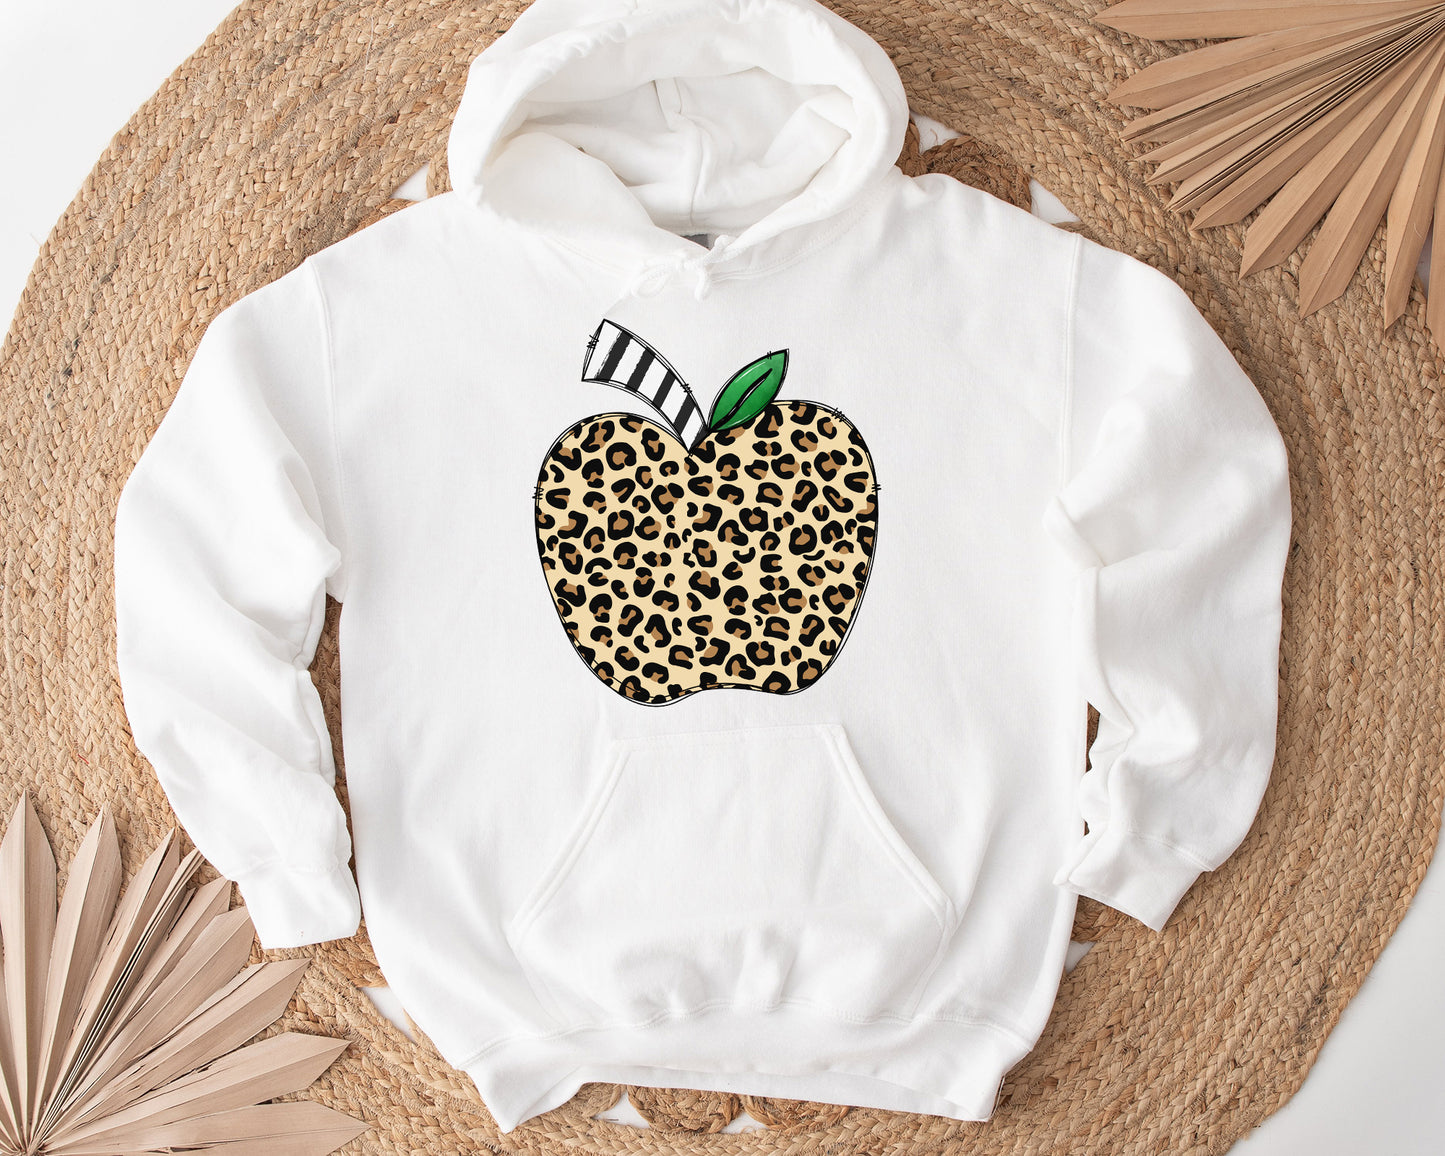 Tee Art Online - Doodle Leopard Apple Teacher Personalized Hoodie | Back To School Customized Hoodie | Hand-drawn Typography Doodle Cute Apple Teacher - no text